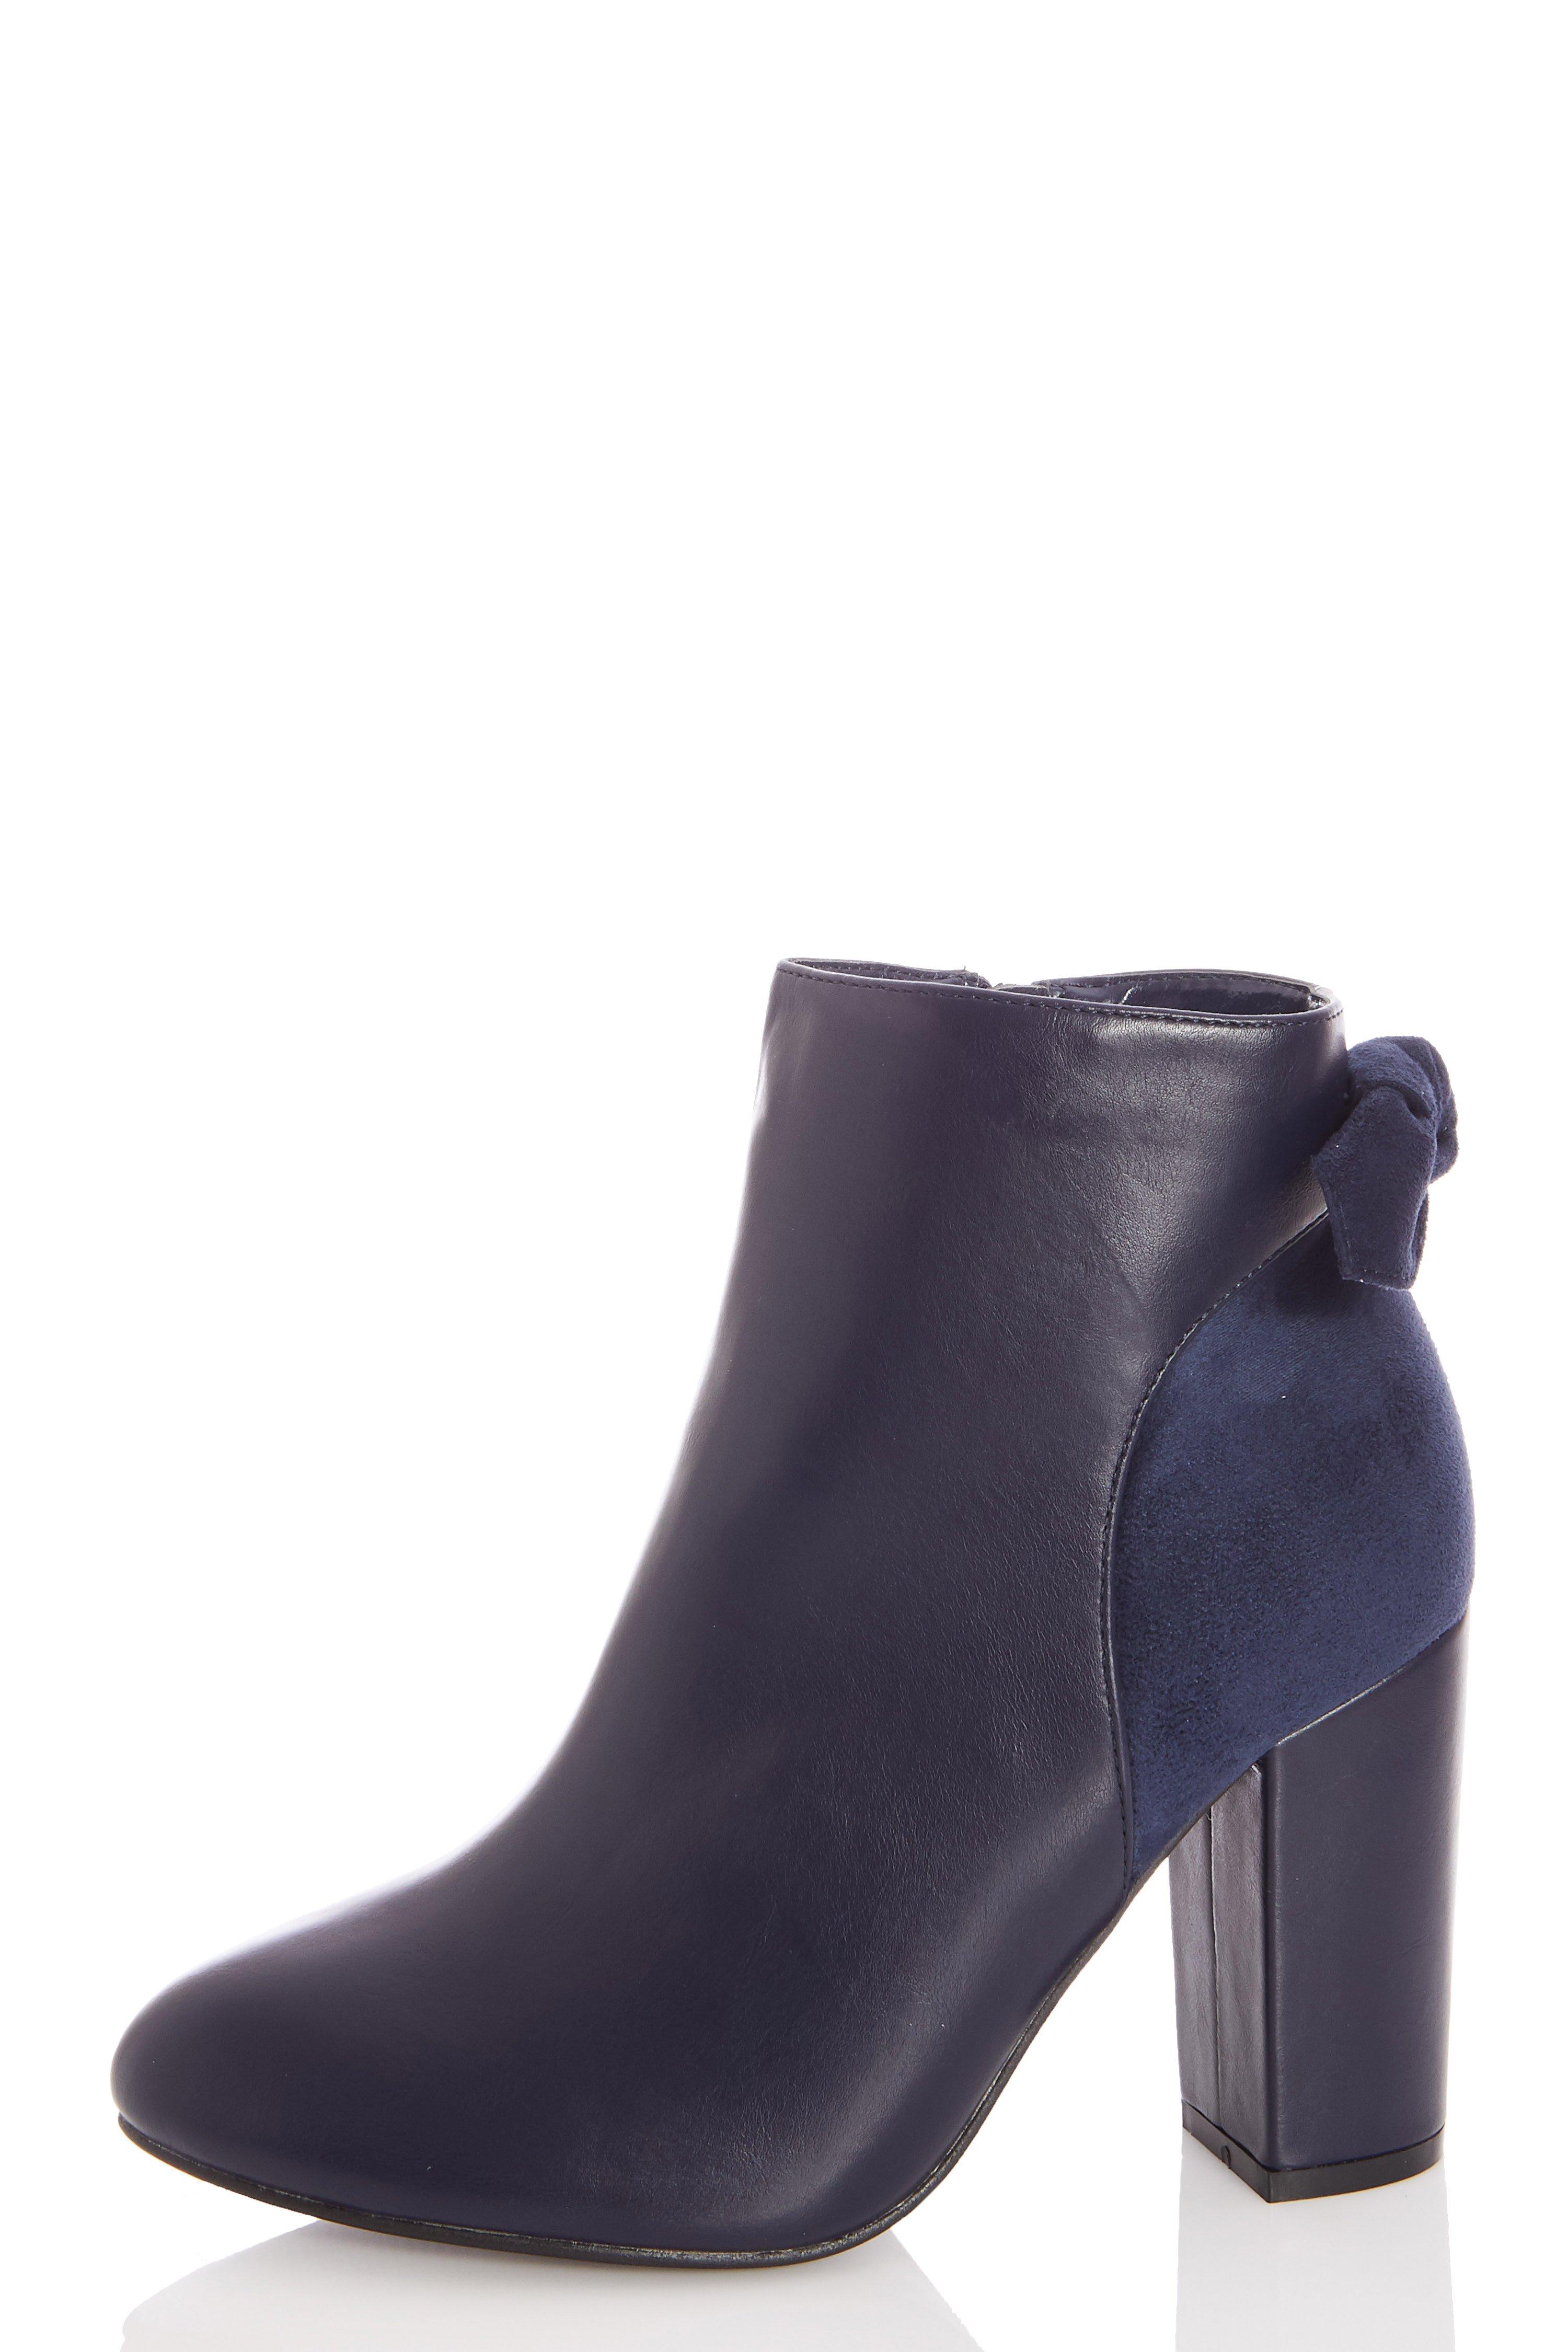 Wide Fit Navy Faux Leather Bow Heeled Ankle Boots - Quiz Clothing